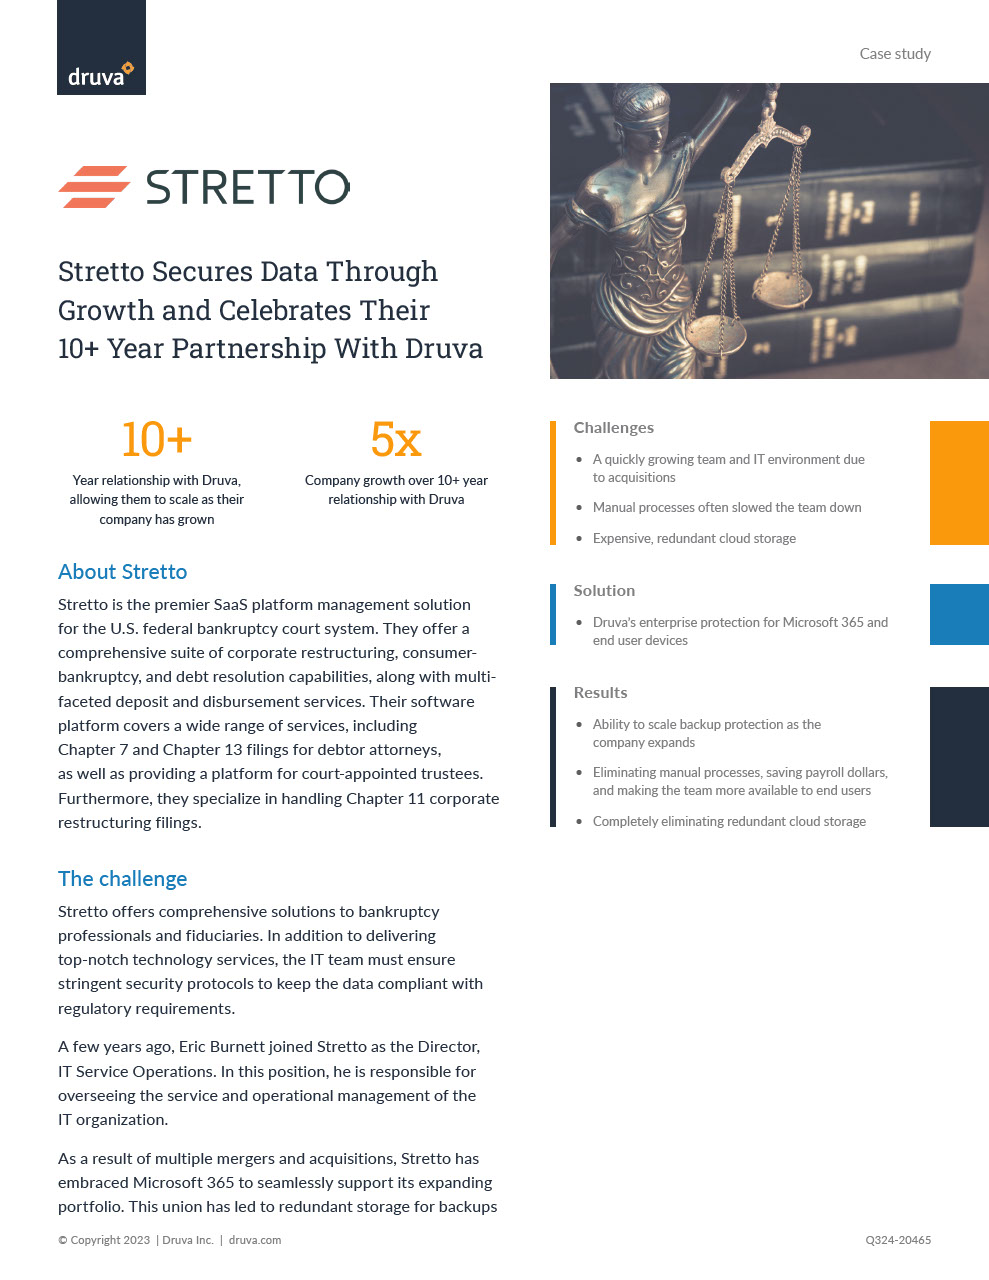 Stretto Secures Data Through Growth and Celebrates Their 10+ Year Partnership With Druva